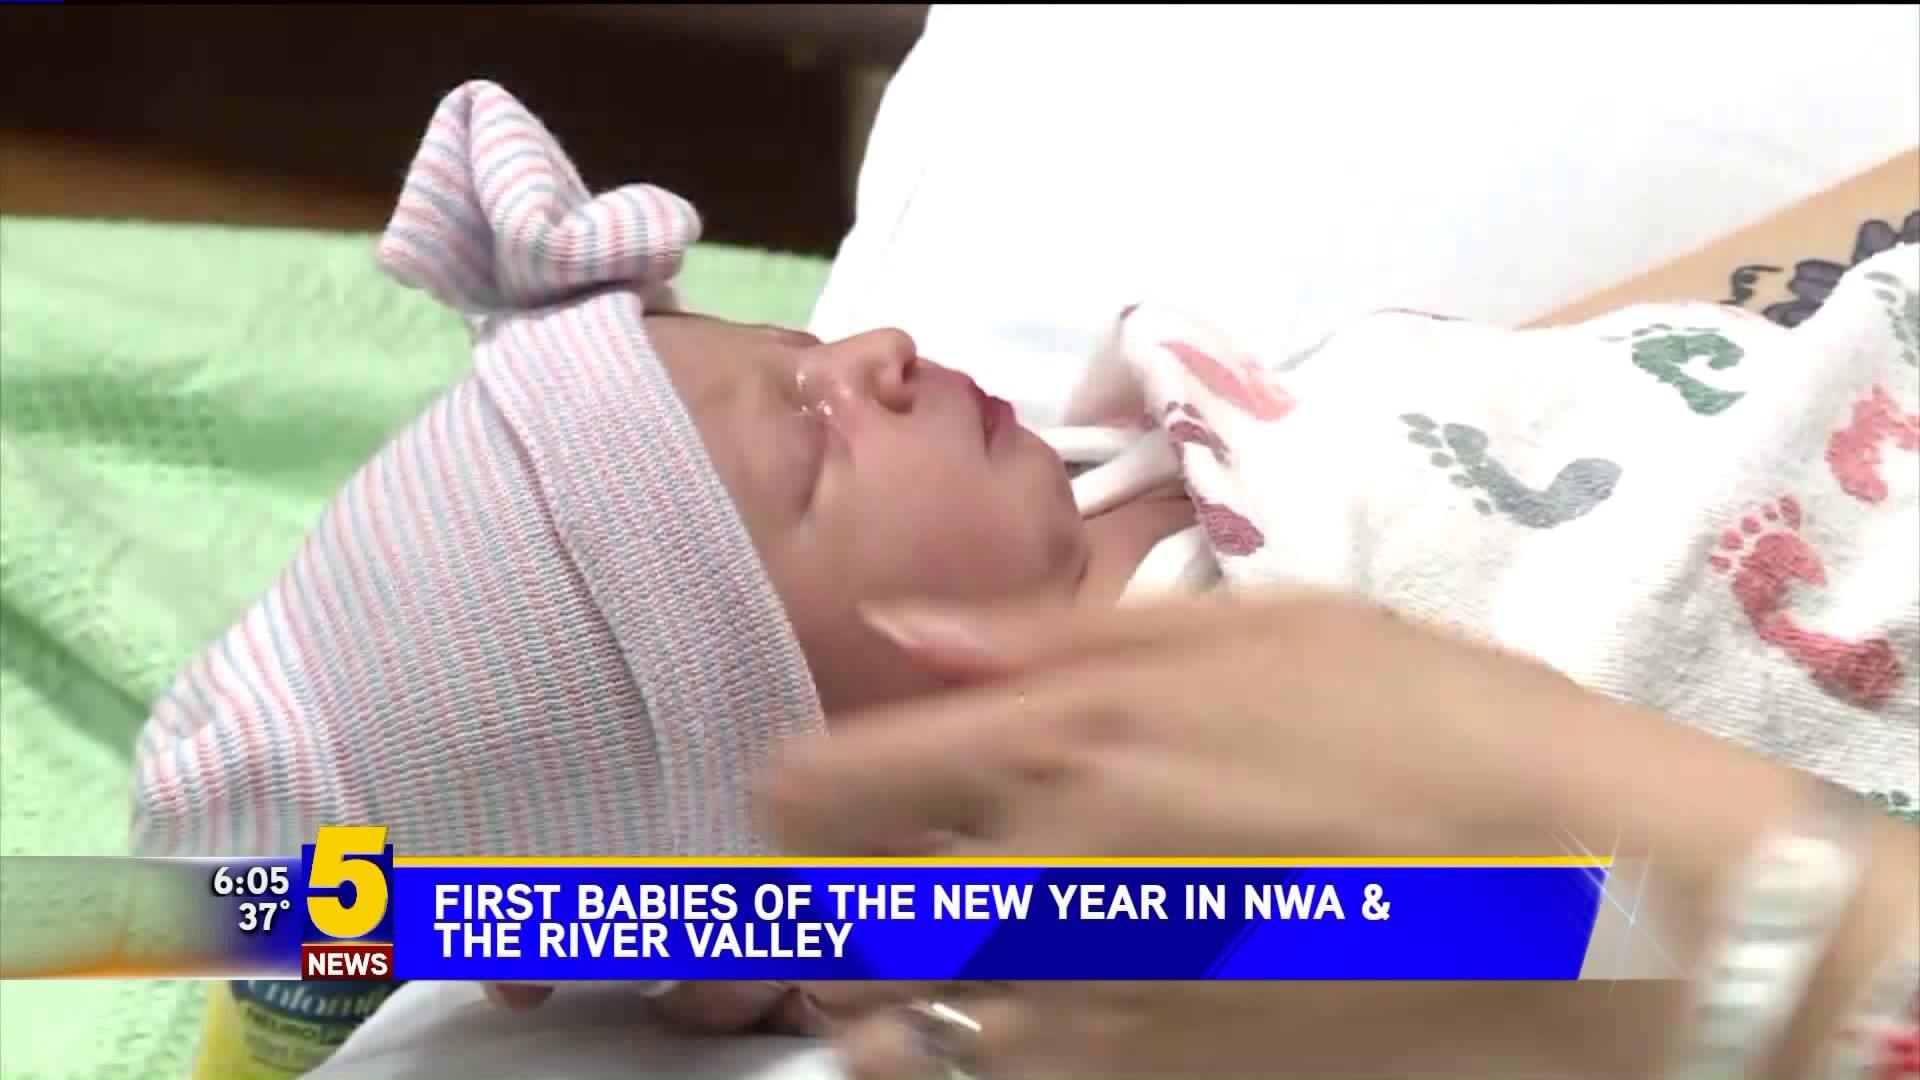 First babies of the New Year in NWA and River Valley